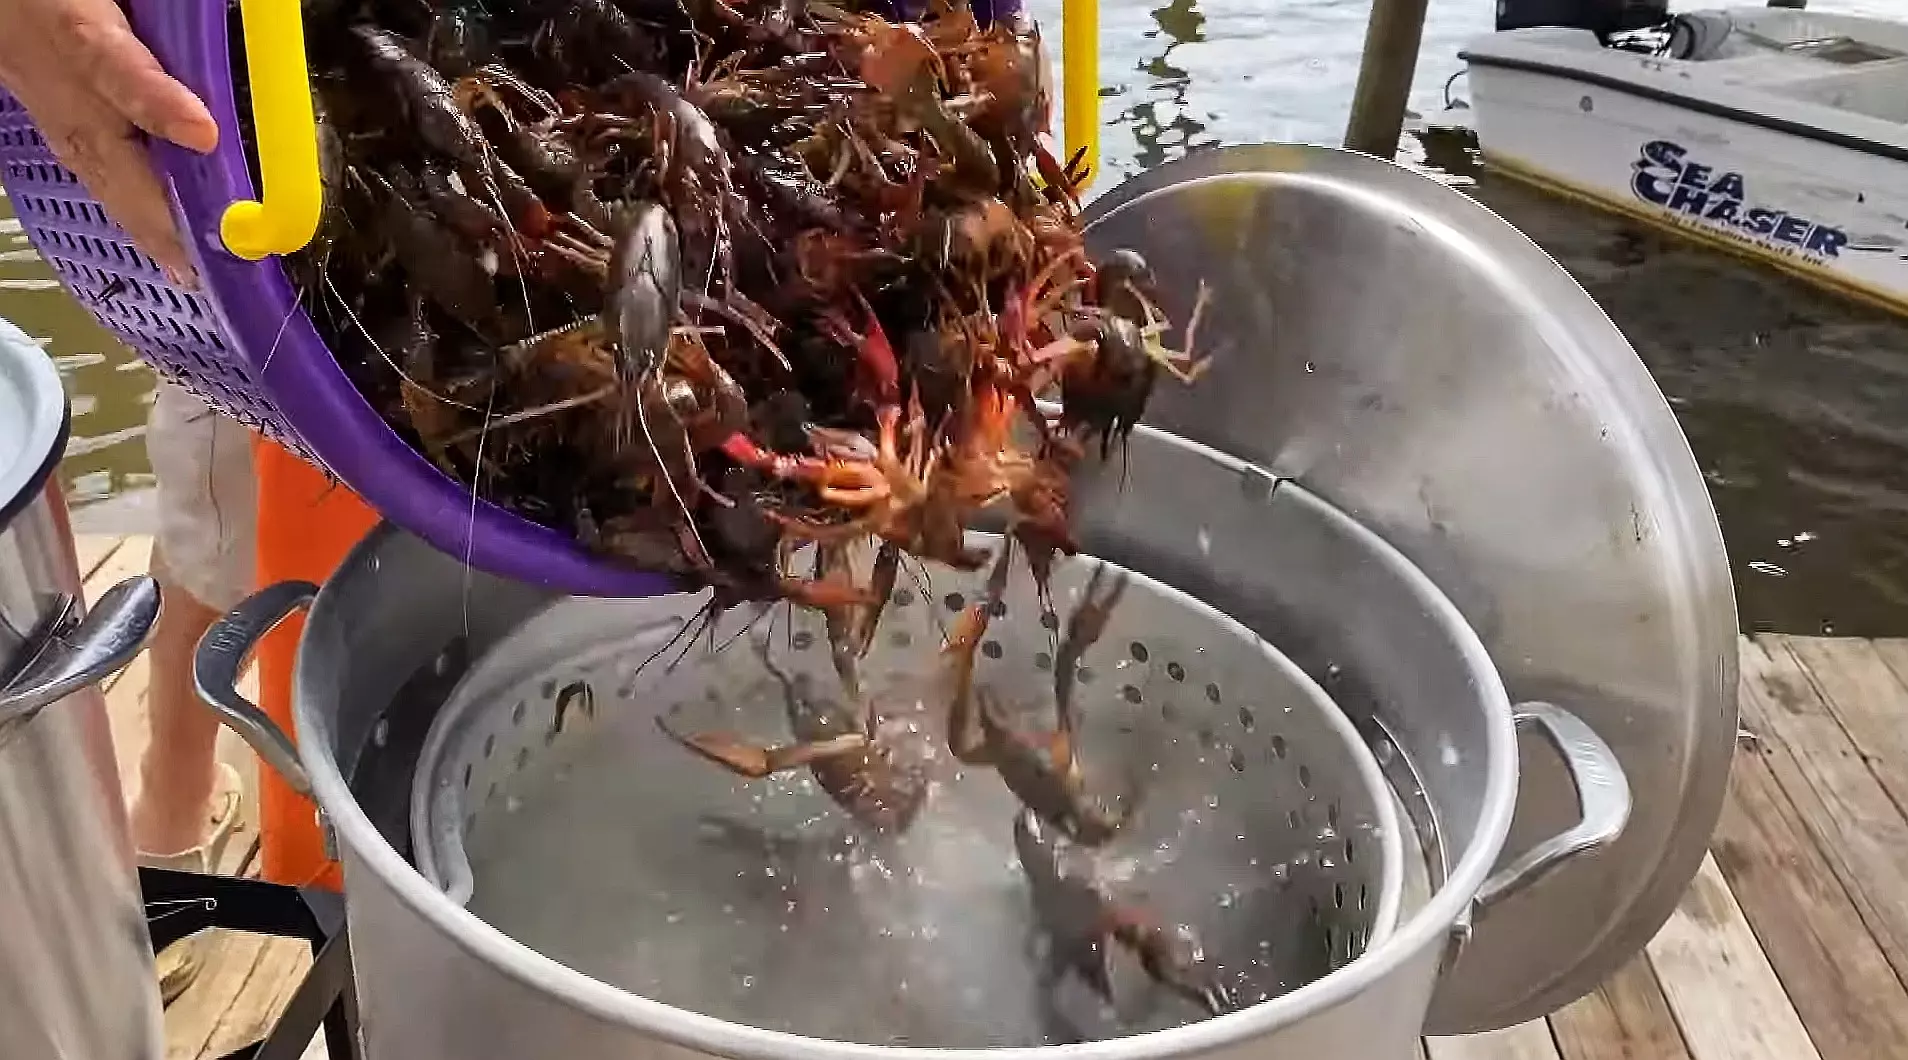 https://townsquare.media/site/33/files/2022/07/attachment-how-to-boil-crawfish.jpg?w=1908&q=75